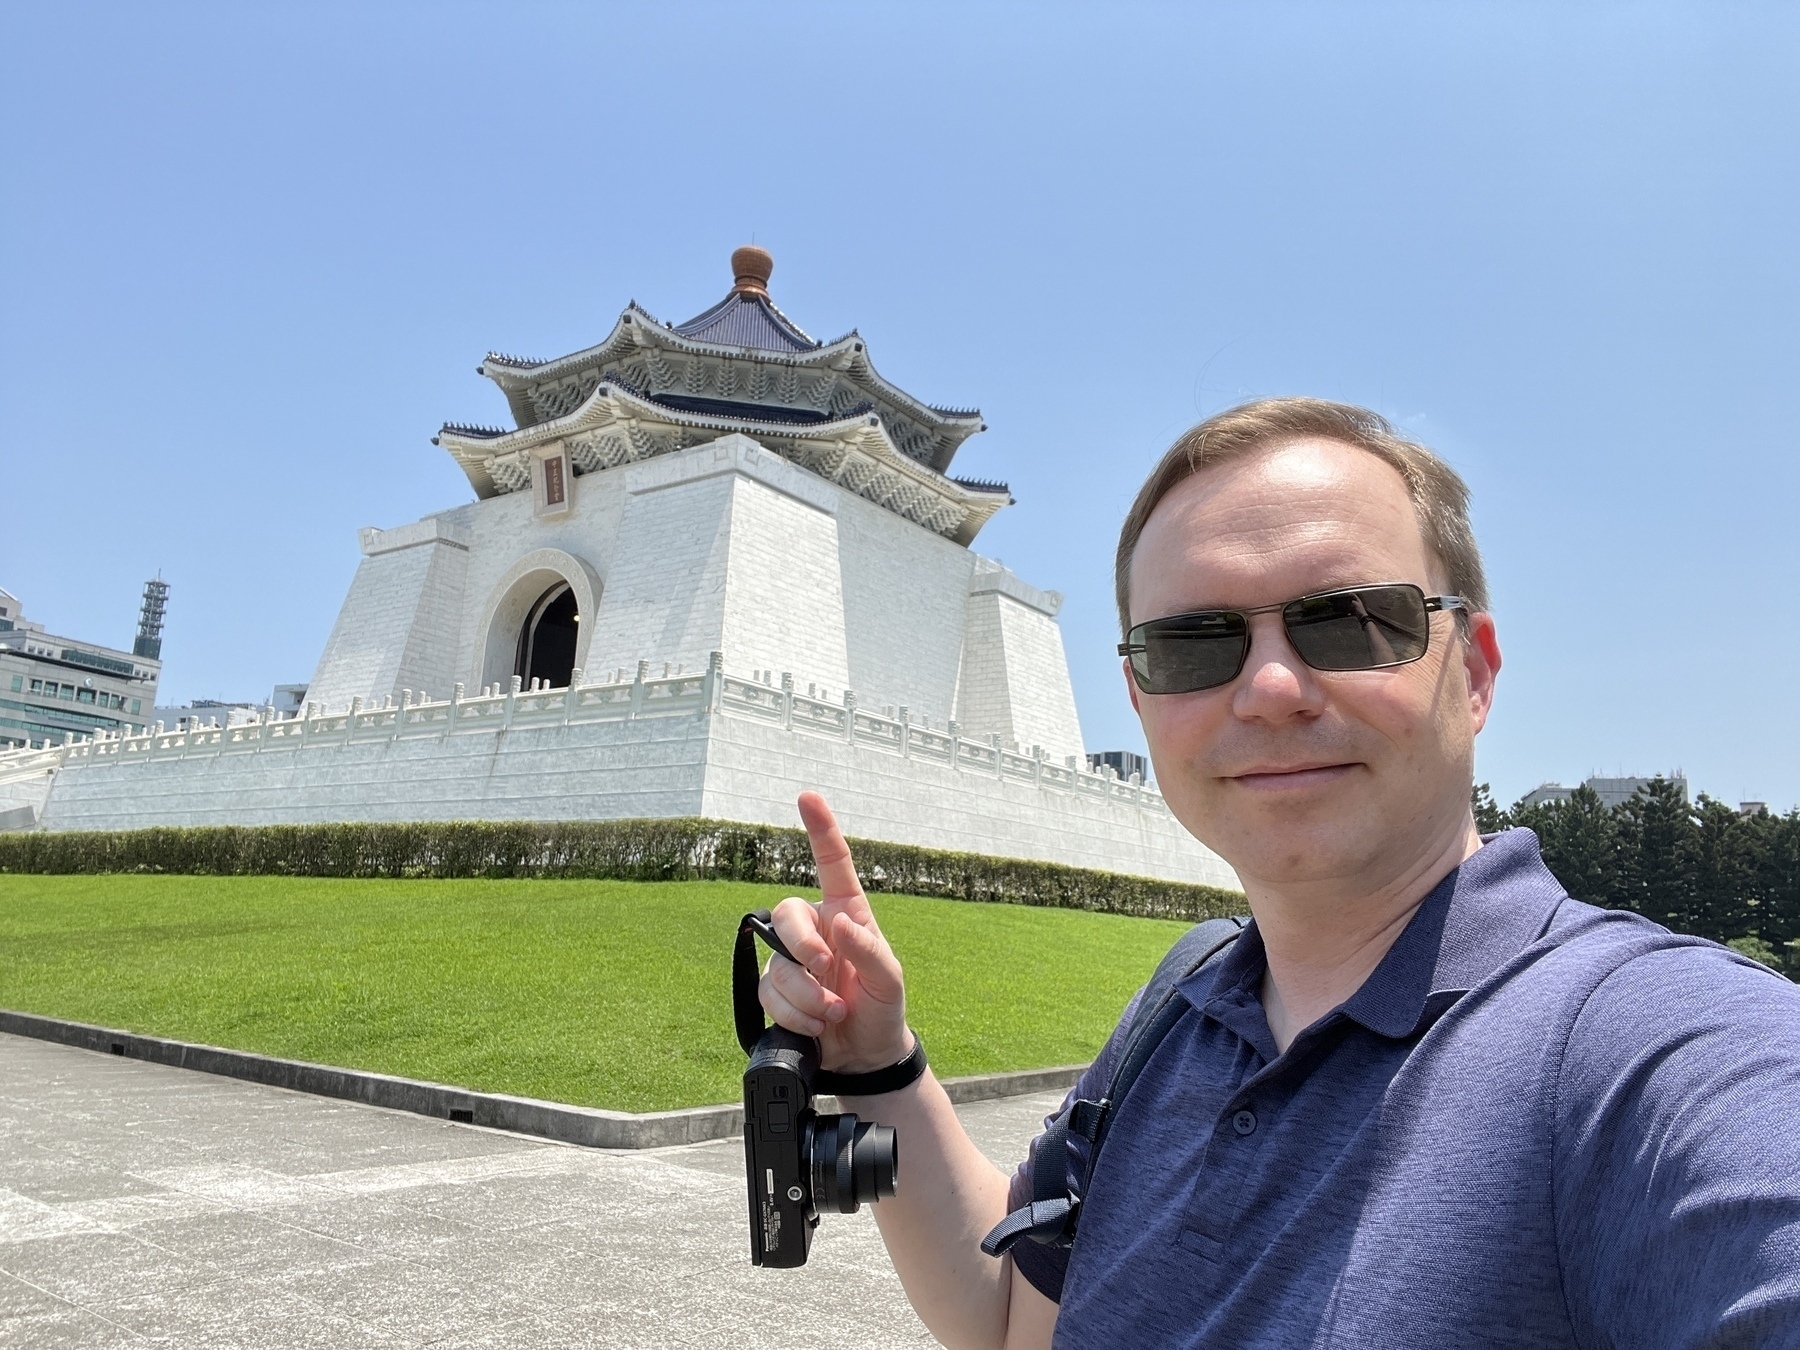 Chad selfie outside the Chiang Kai Shek Memorial, which is a large white building with a long stairway